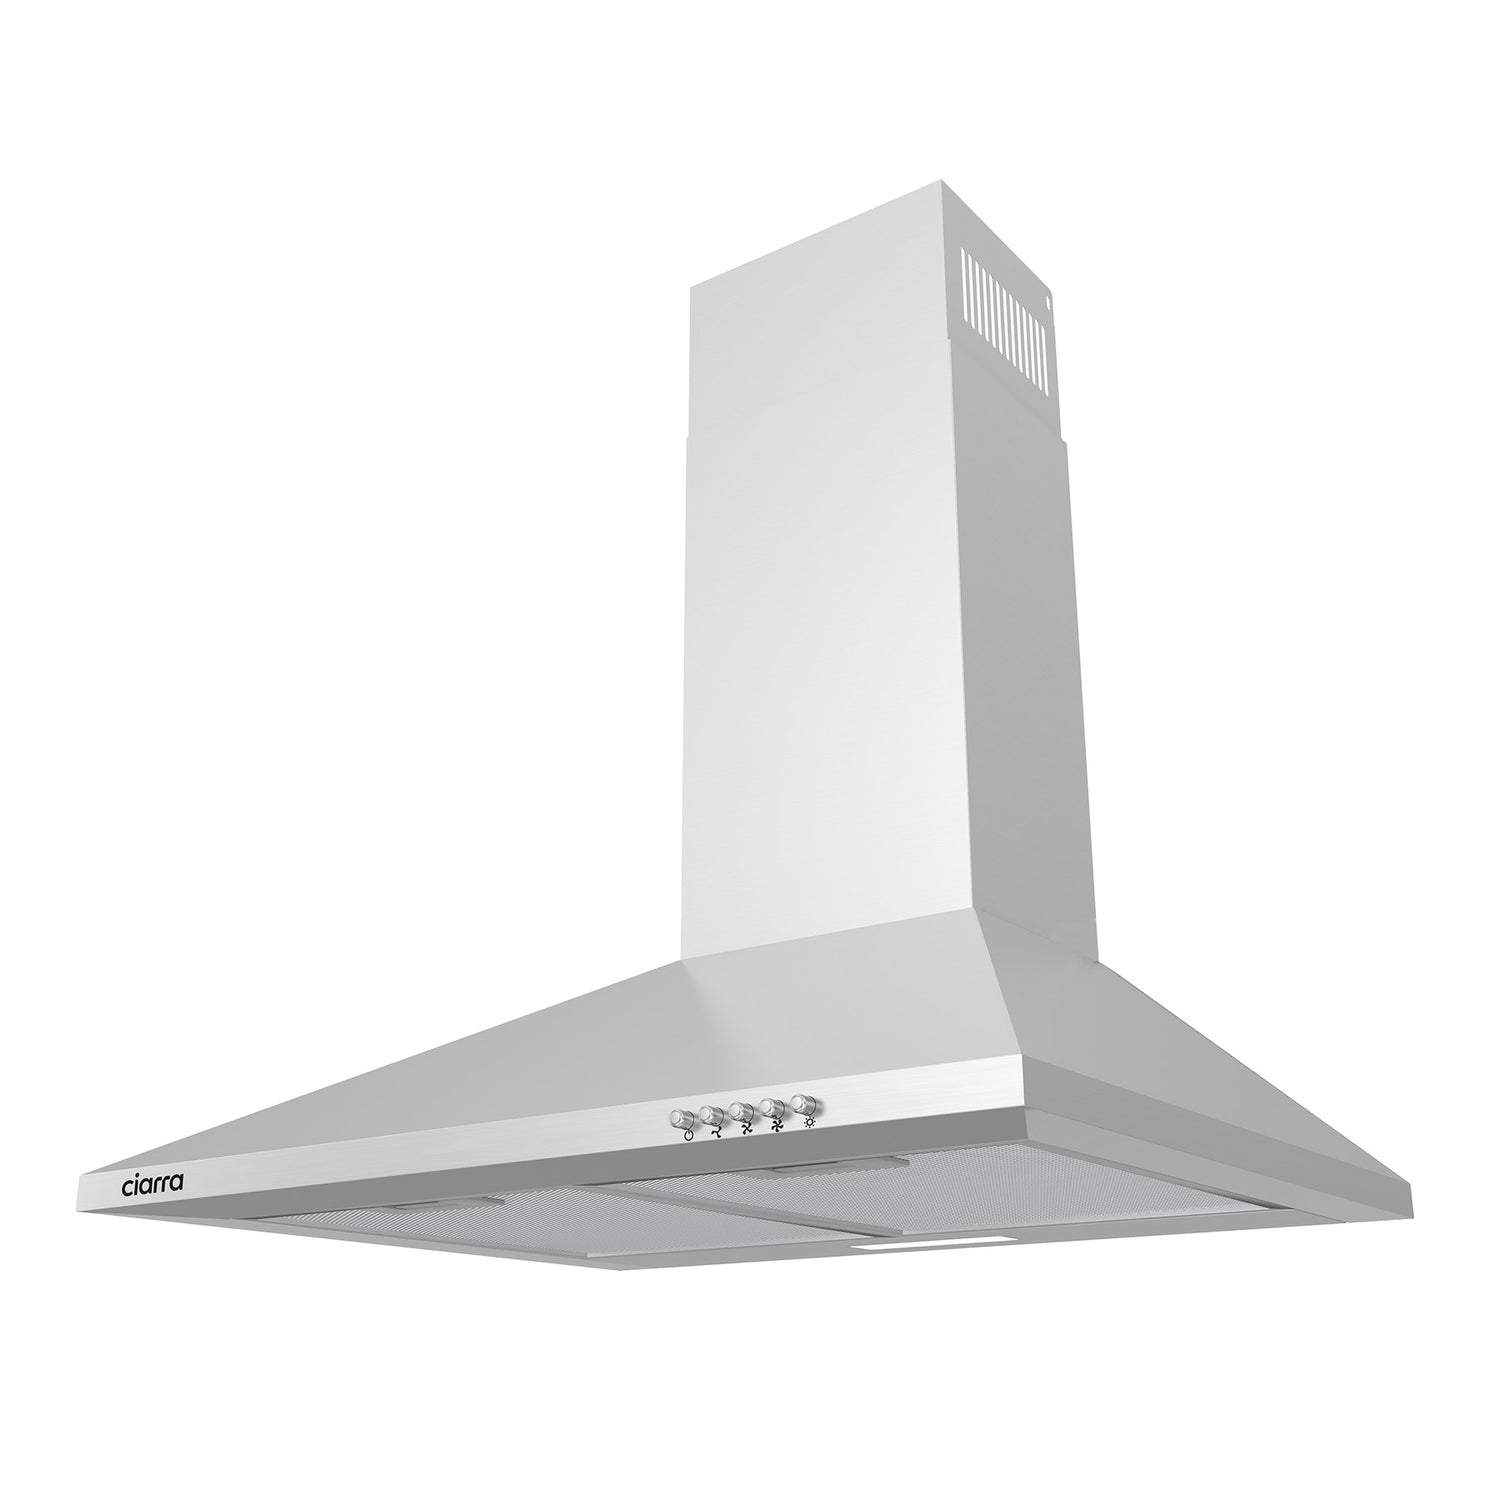 CIARRA 60cm Wall Mount Cooker Hood with 3-speed Extraction CBCS6201-OW